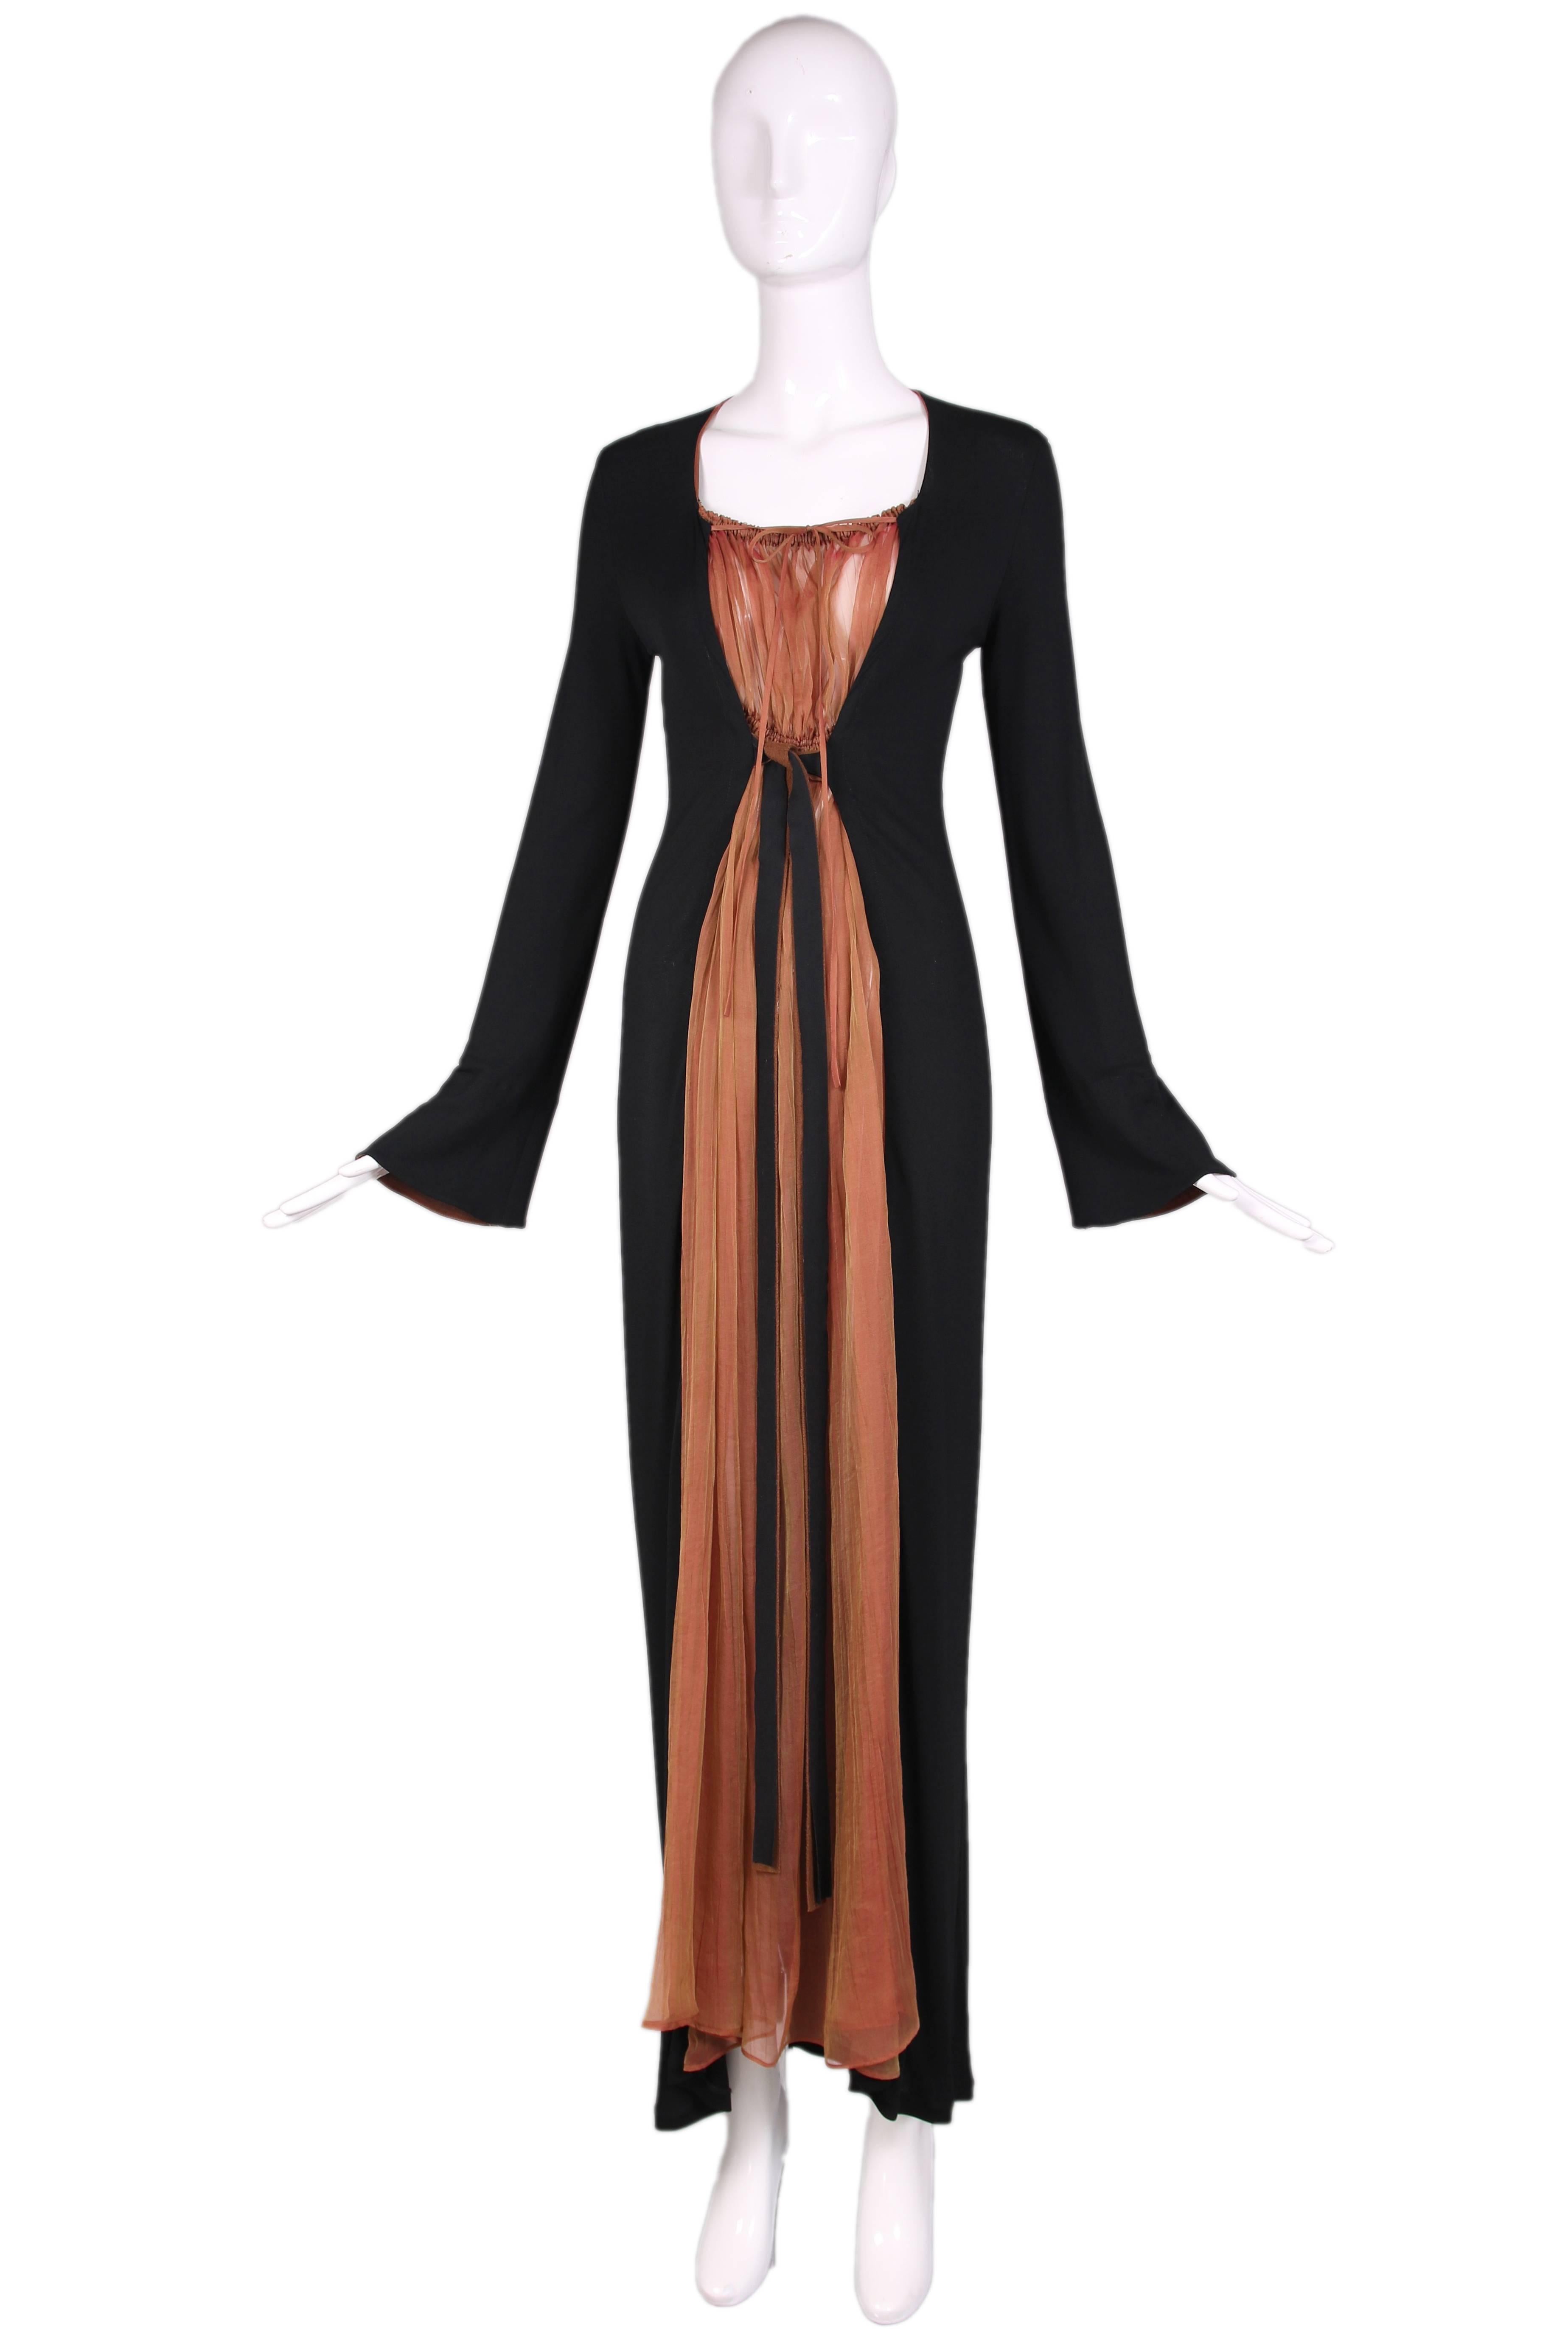 Jean-Paul Gaultier black jersey maxi dress with bronze chiffon inset and subtle bell sleeves. Chiffon inset has a heavily pleated elastic neckline as well as waist and thin chiffon ties at neckline. Waist ties are jersey on one side and felt on the